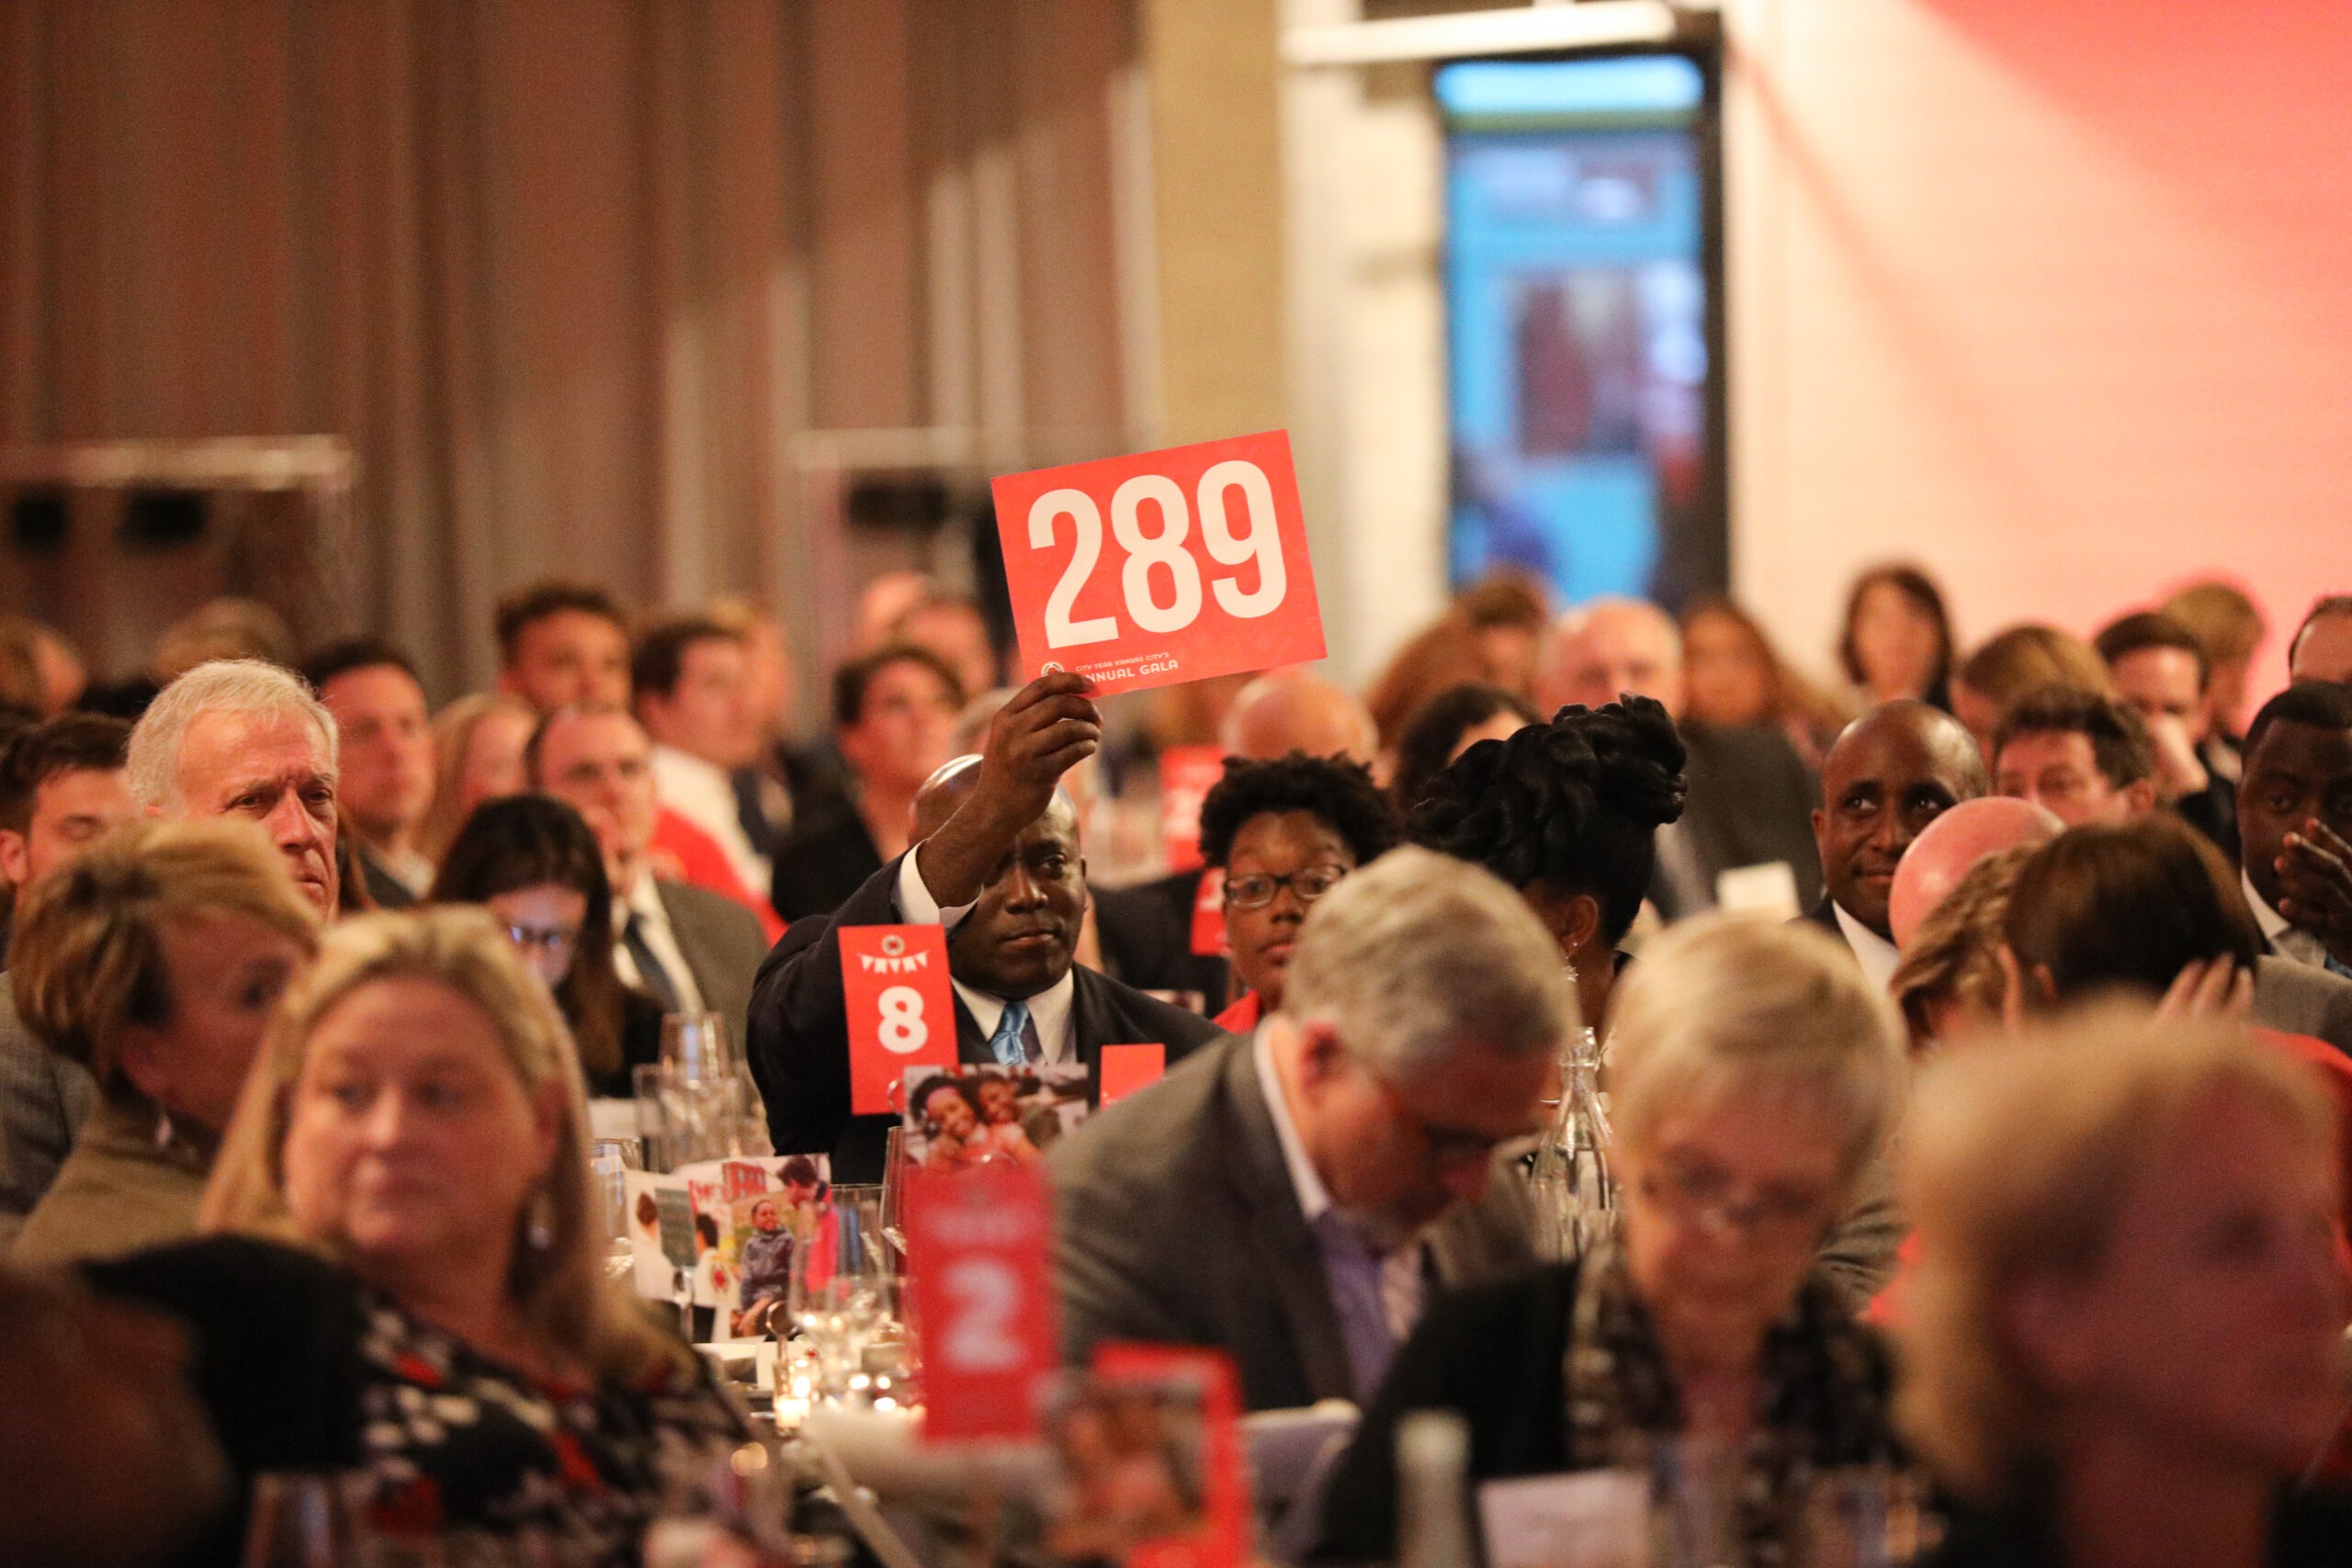 Guests participating in an auction at CY Kansas City's First Annual Gala